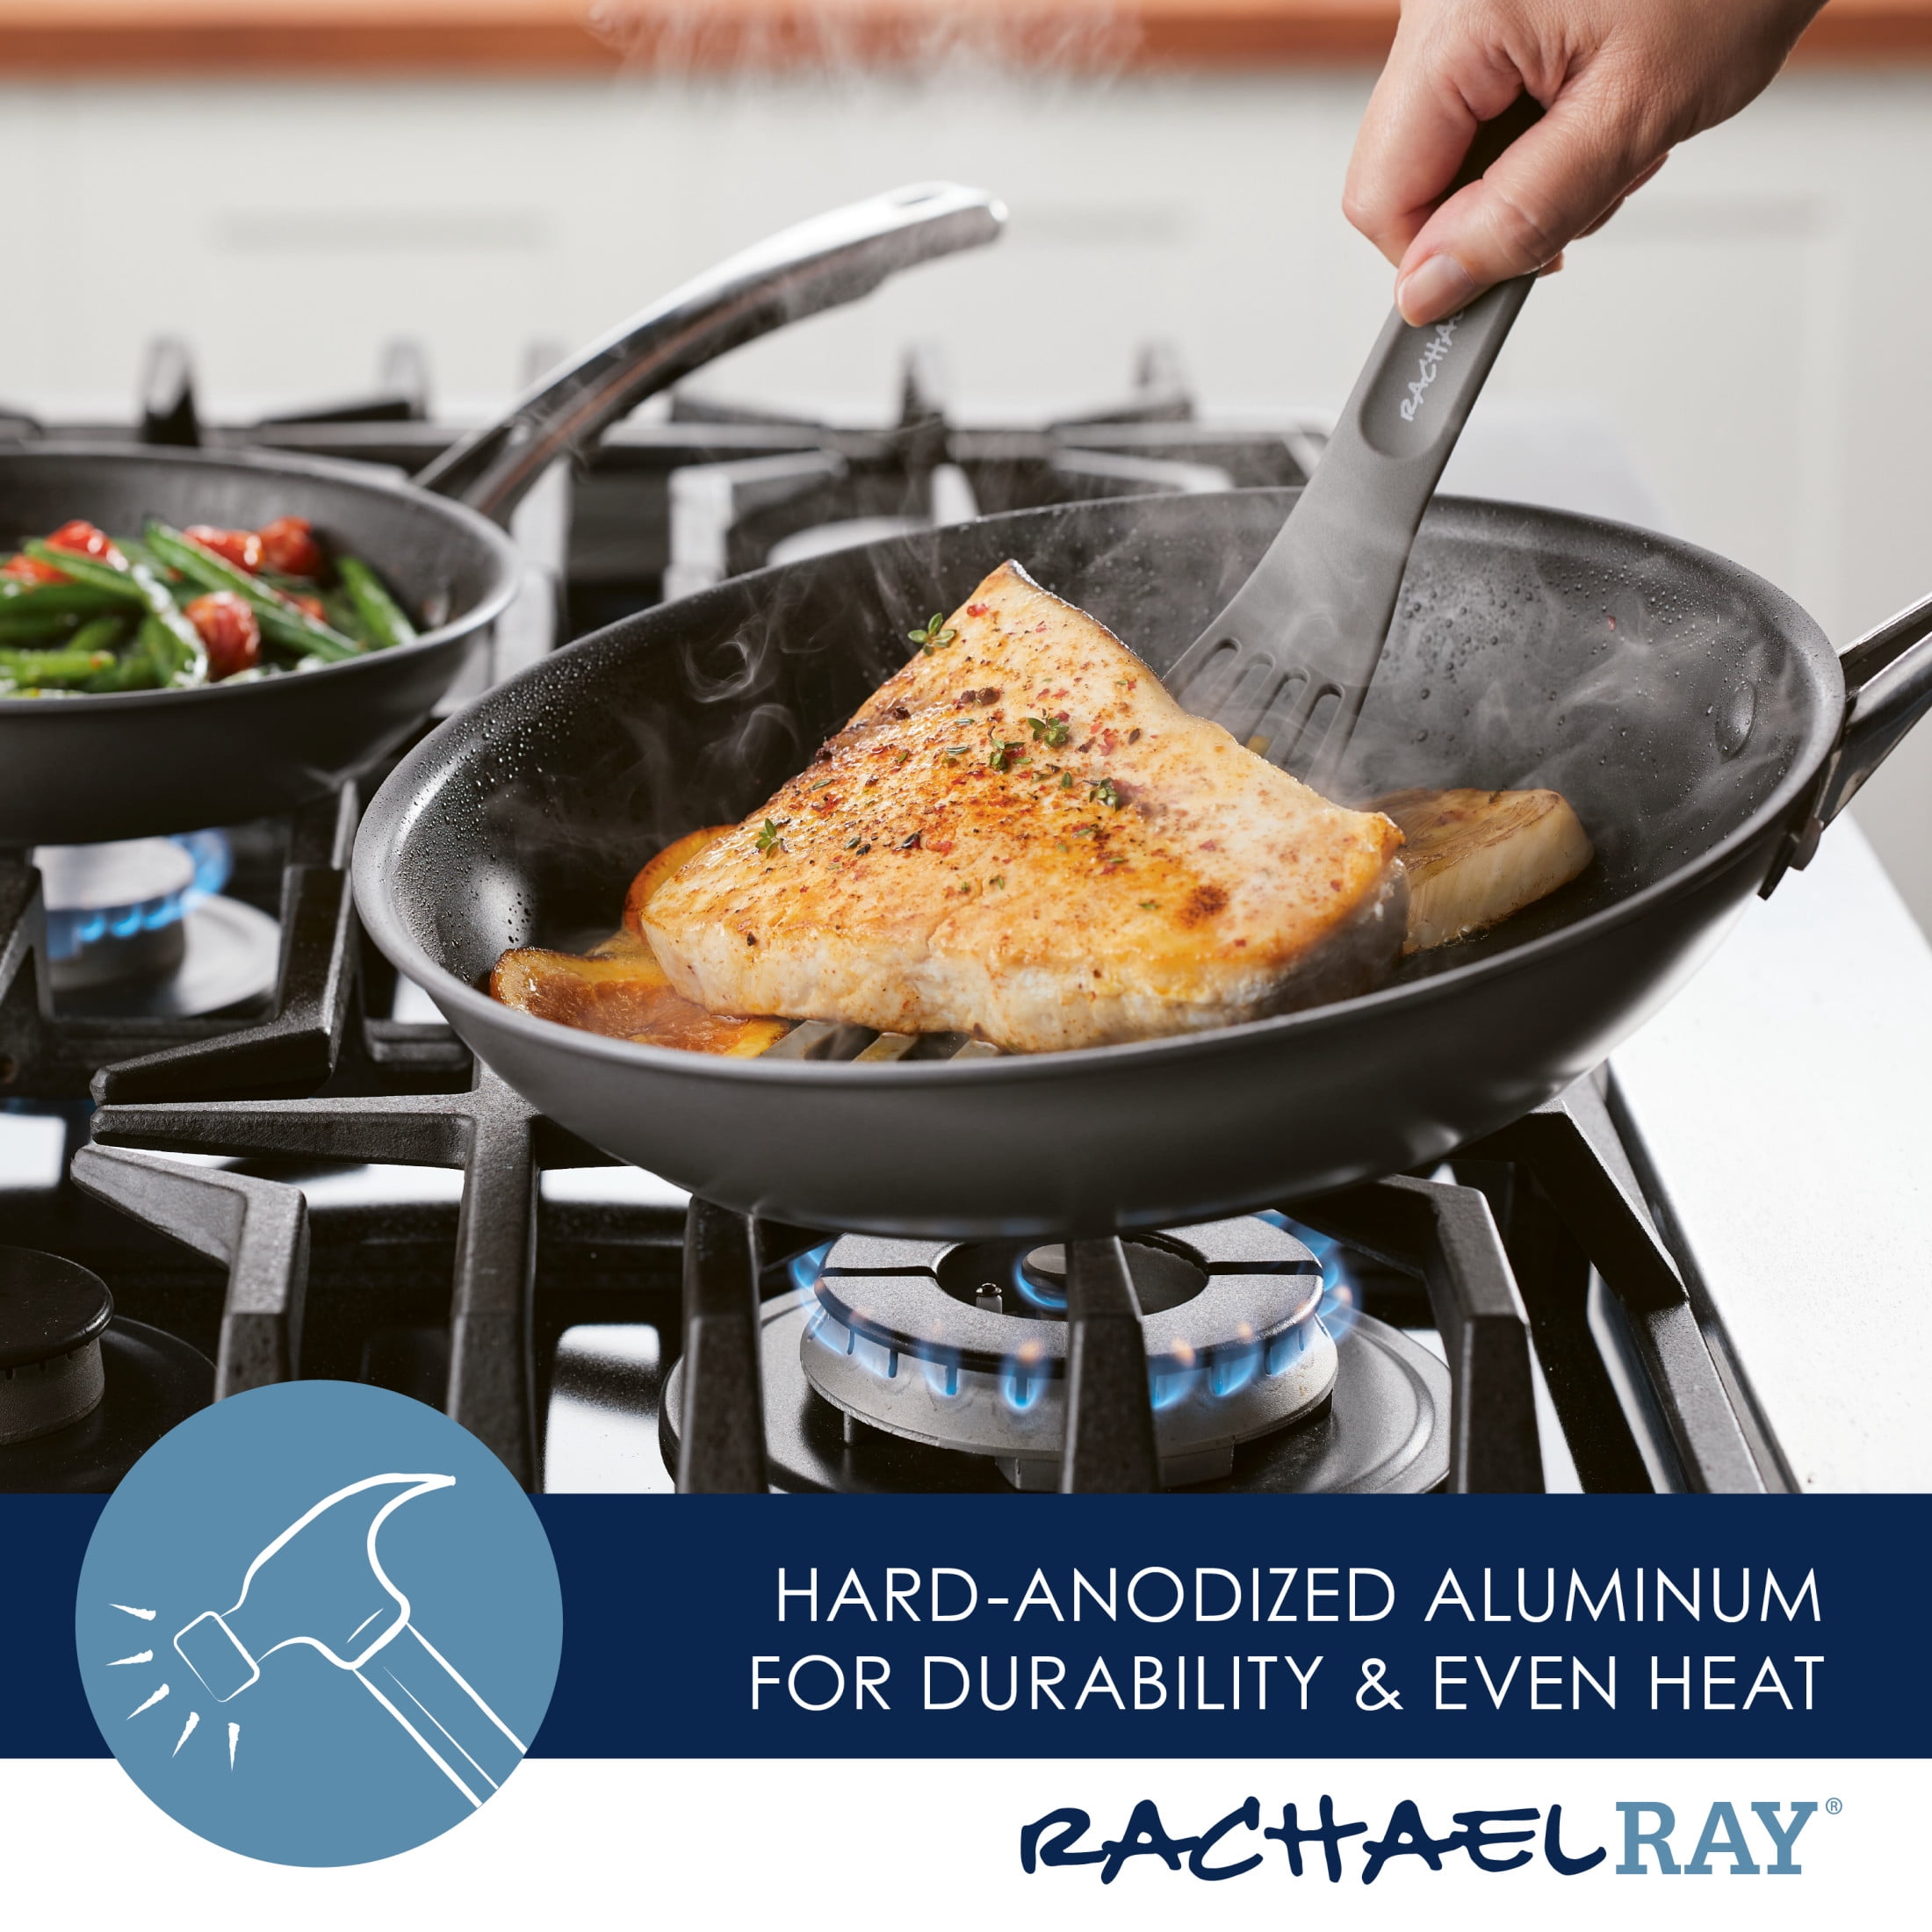 Rachael Ray Cook + Create Hard Anodized Nonstick Frying Pan with